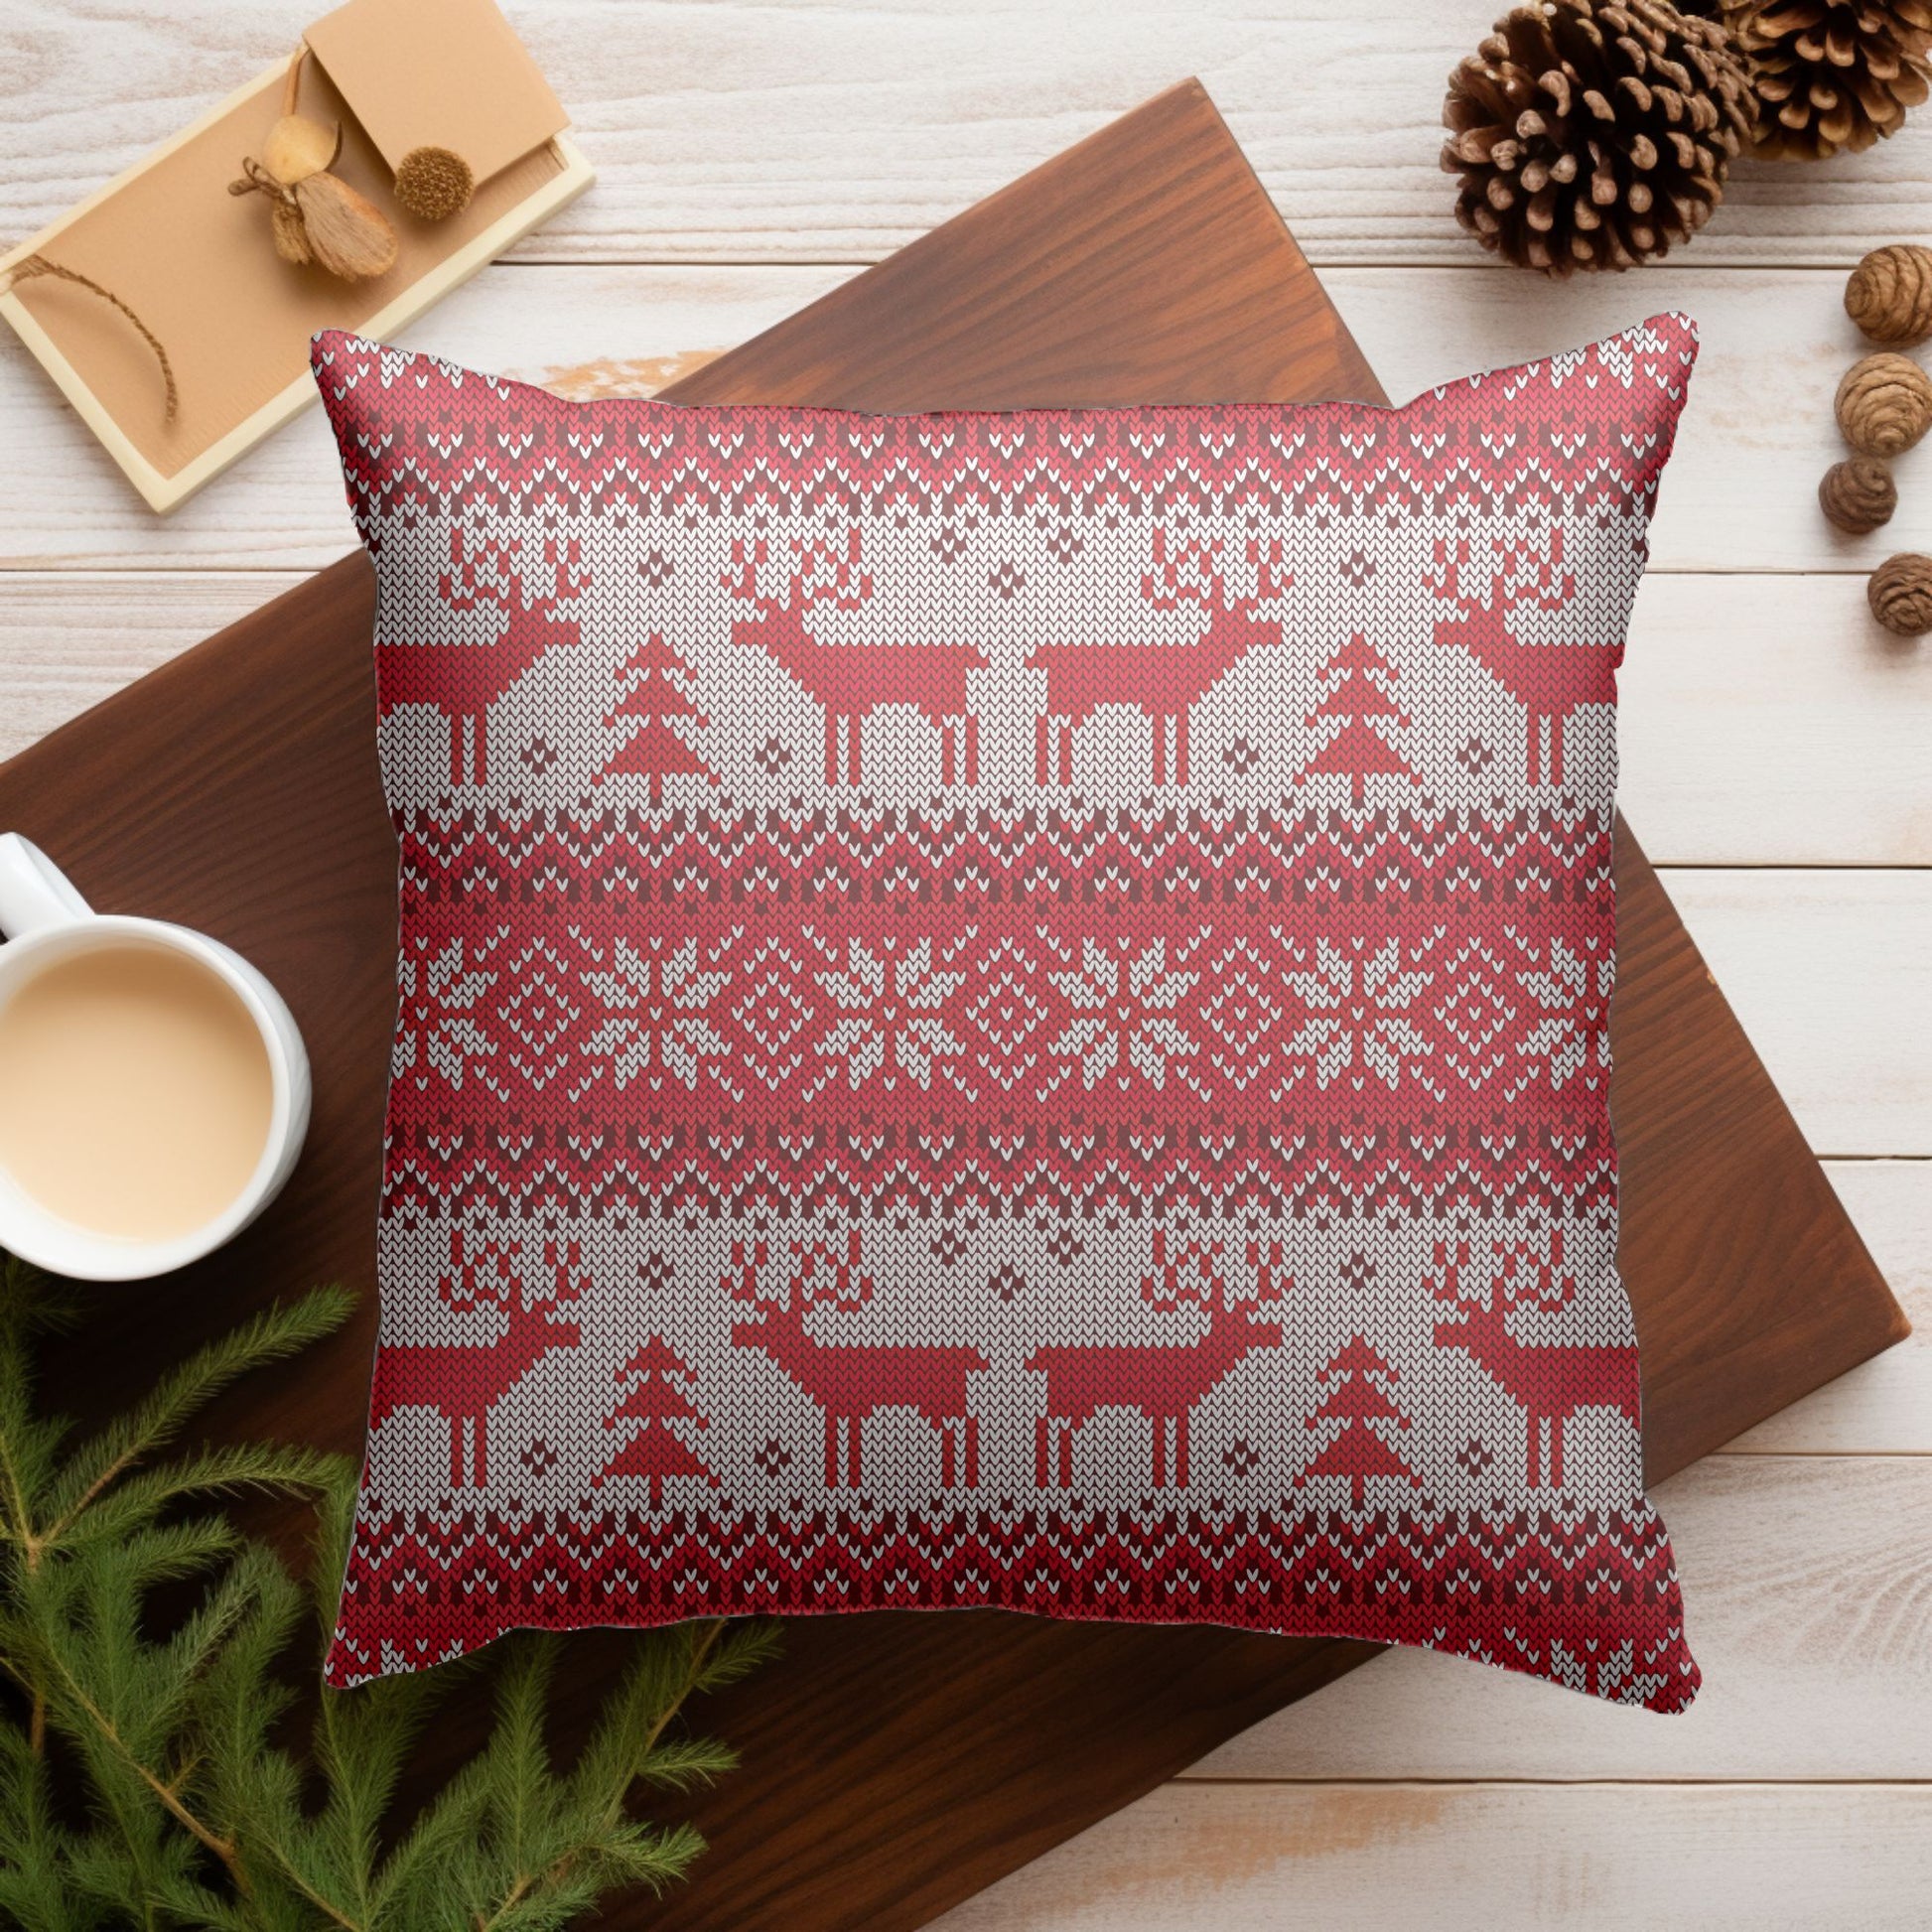 Christmas Decor Pillow with Cheerful Reindeer Design